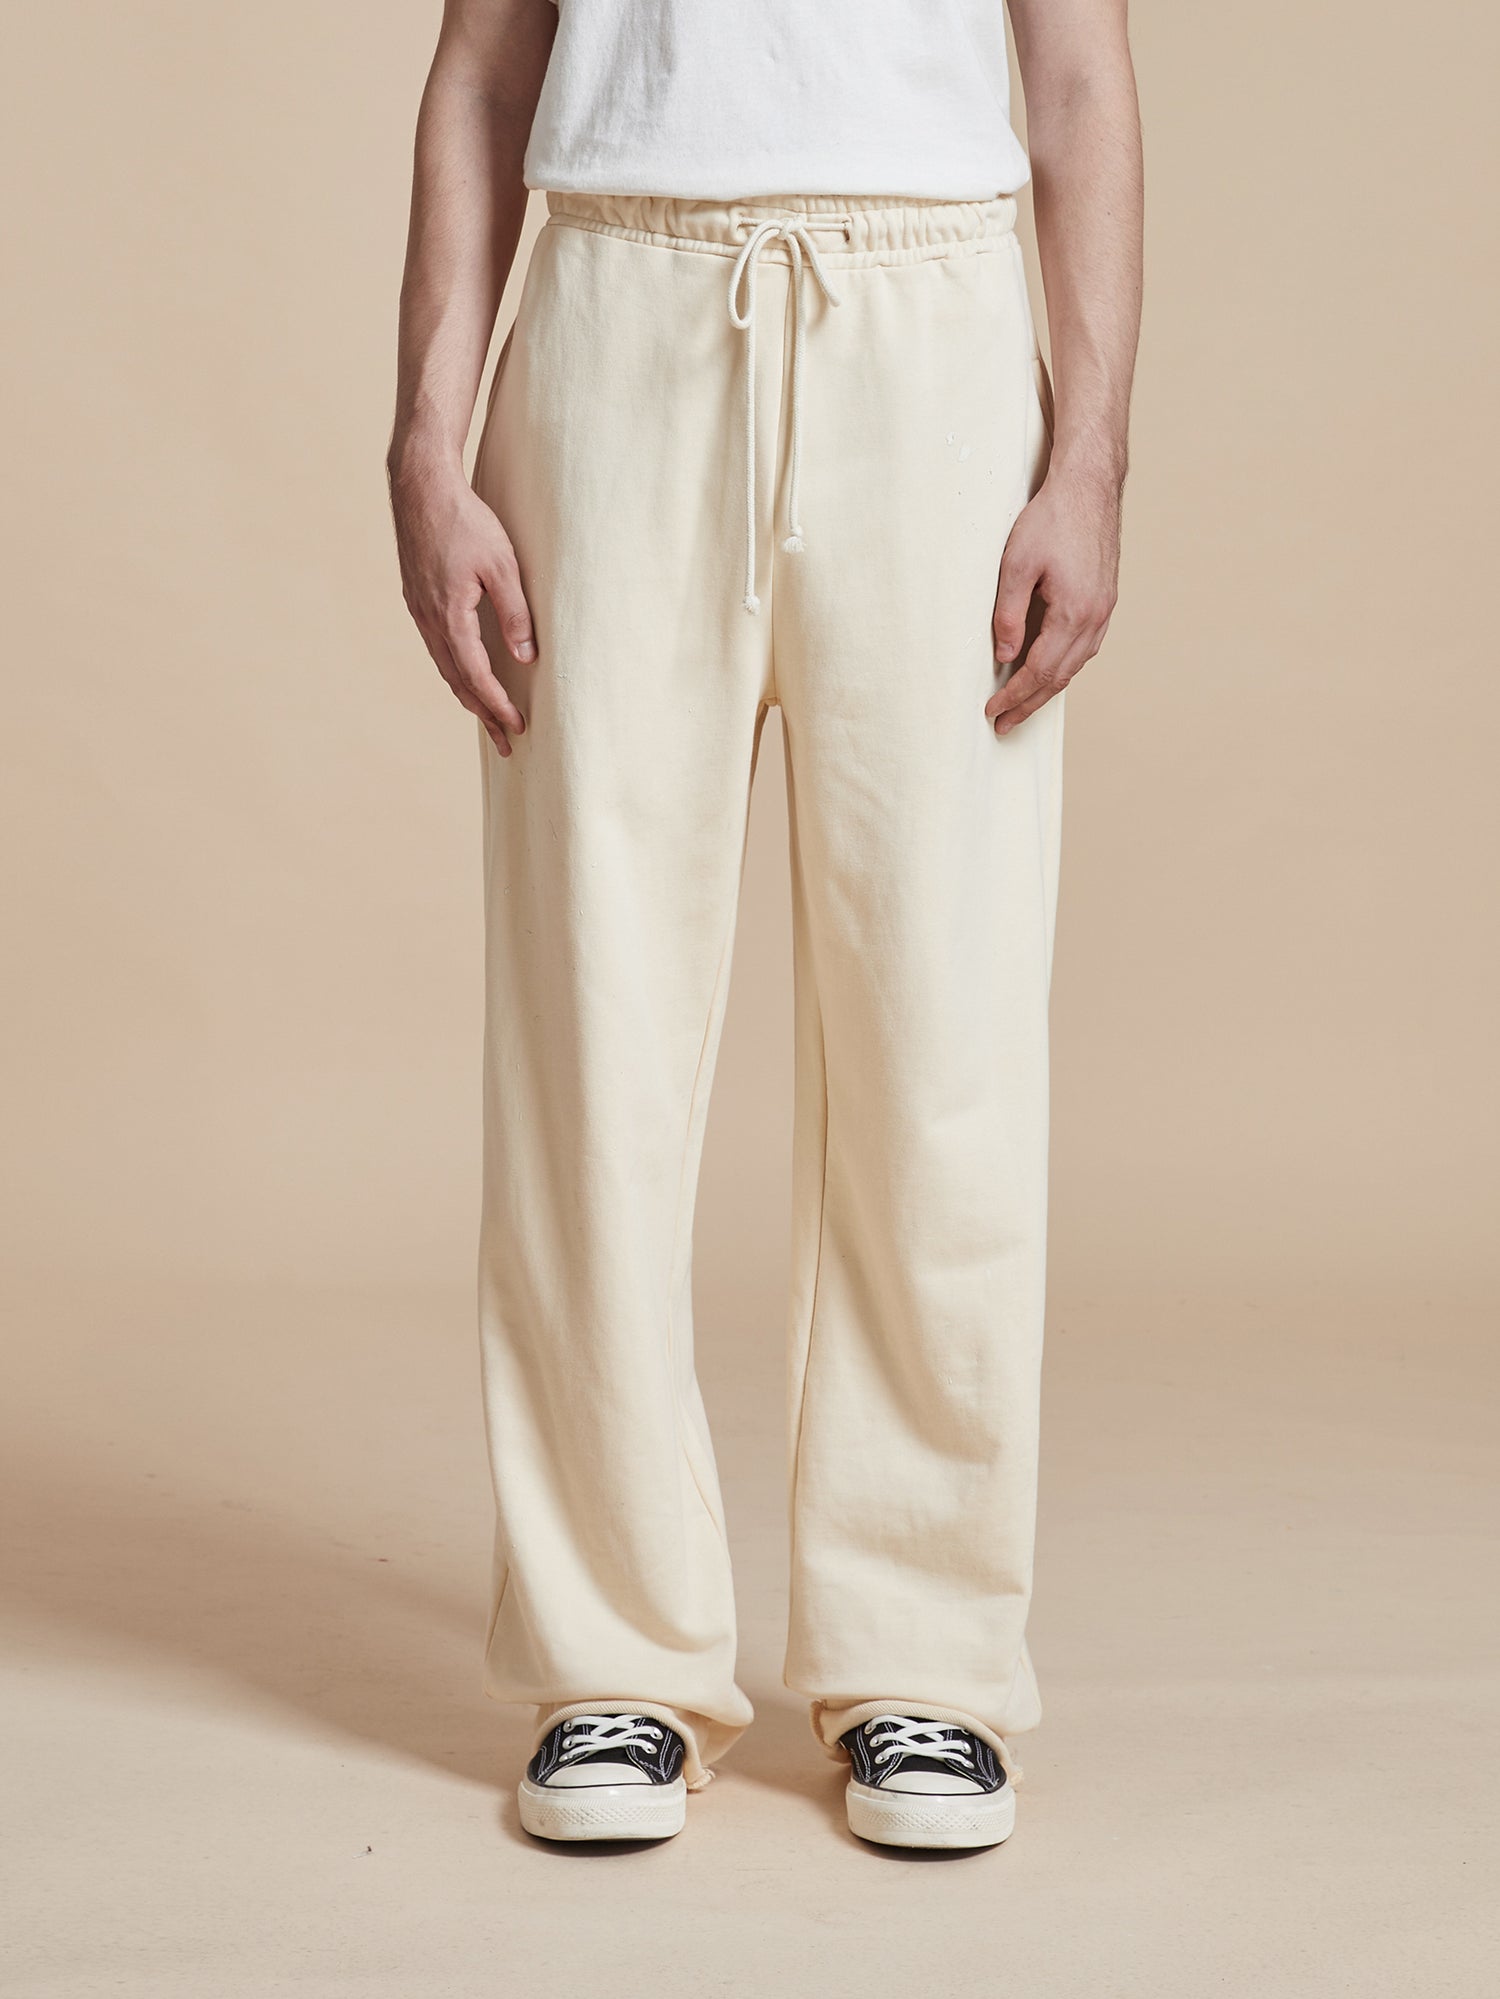 A man wearing a white t-shirt and sweatpants, including the wardrobe staple of Found Sandshell Lounge Pants.